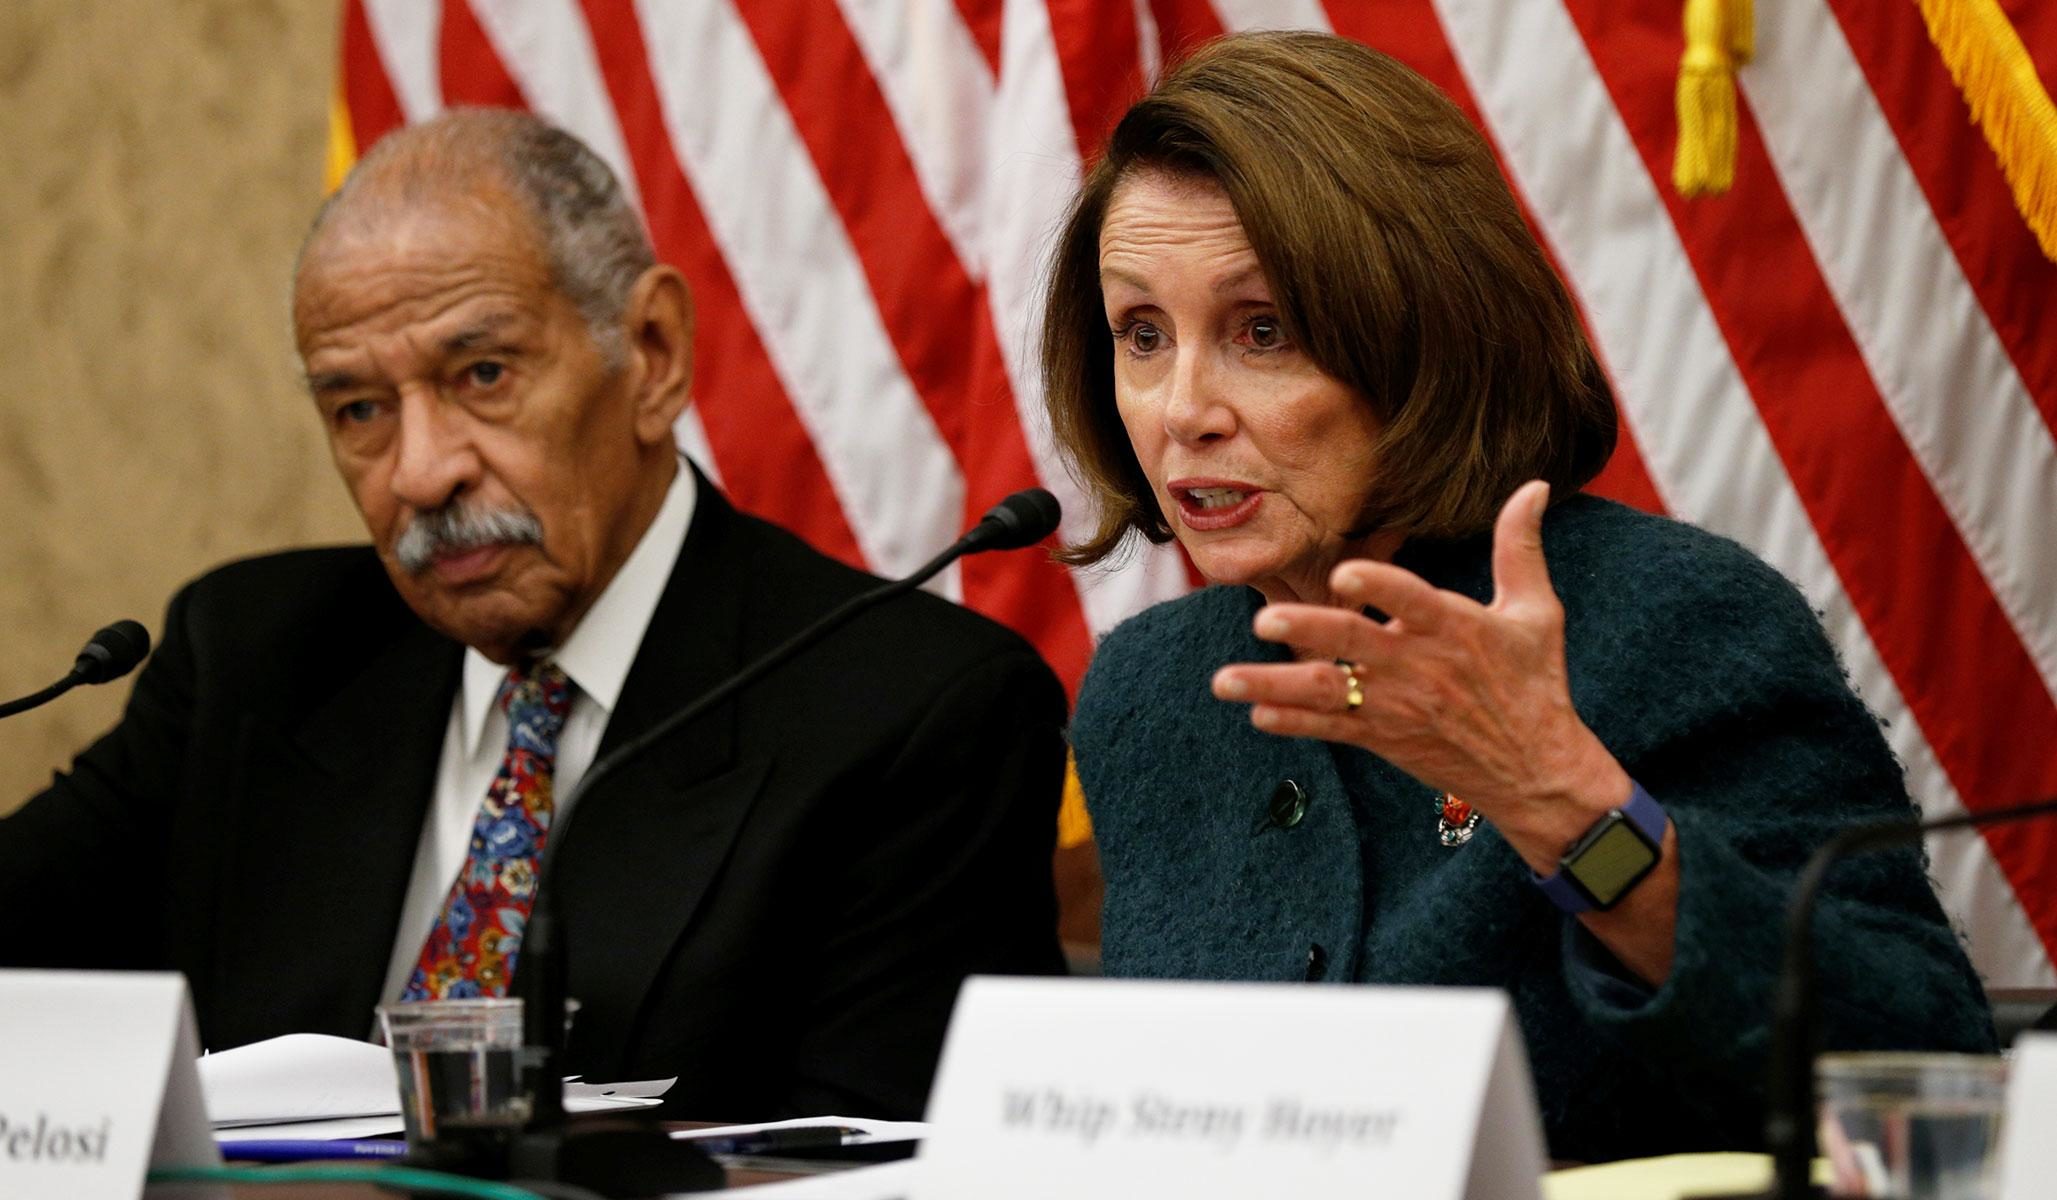 Pelosi and Conyers